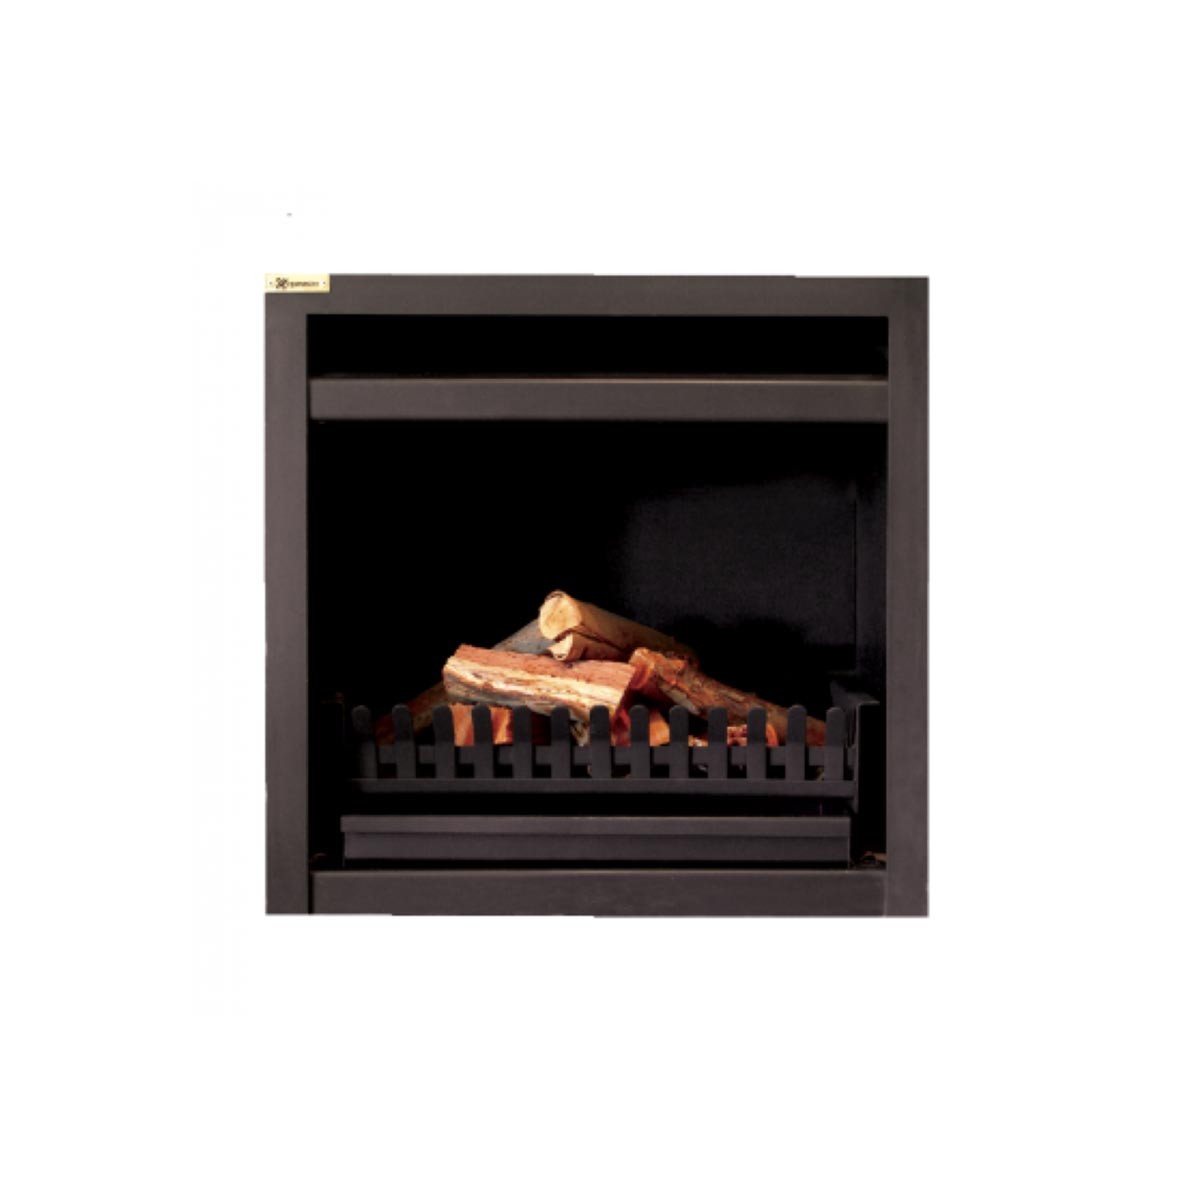 Megamaster 1000 Built-in Fireplace